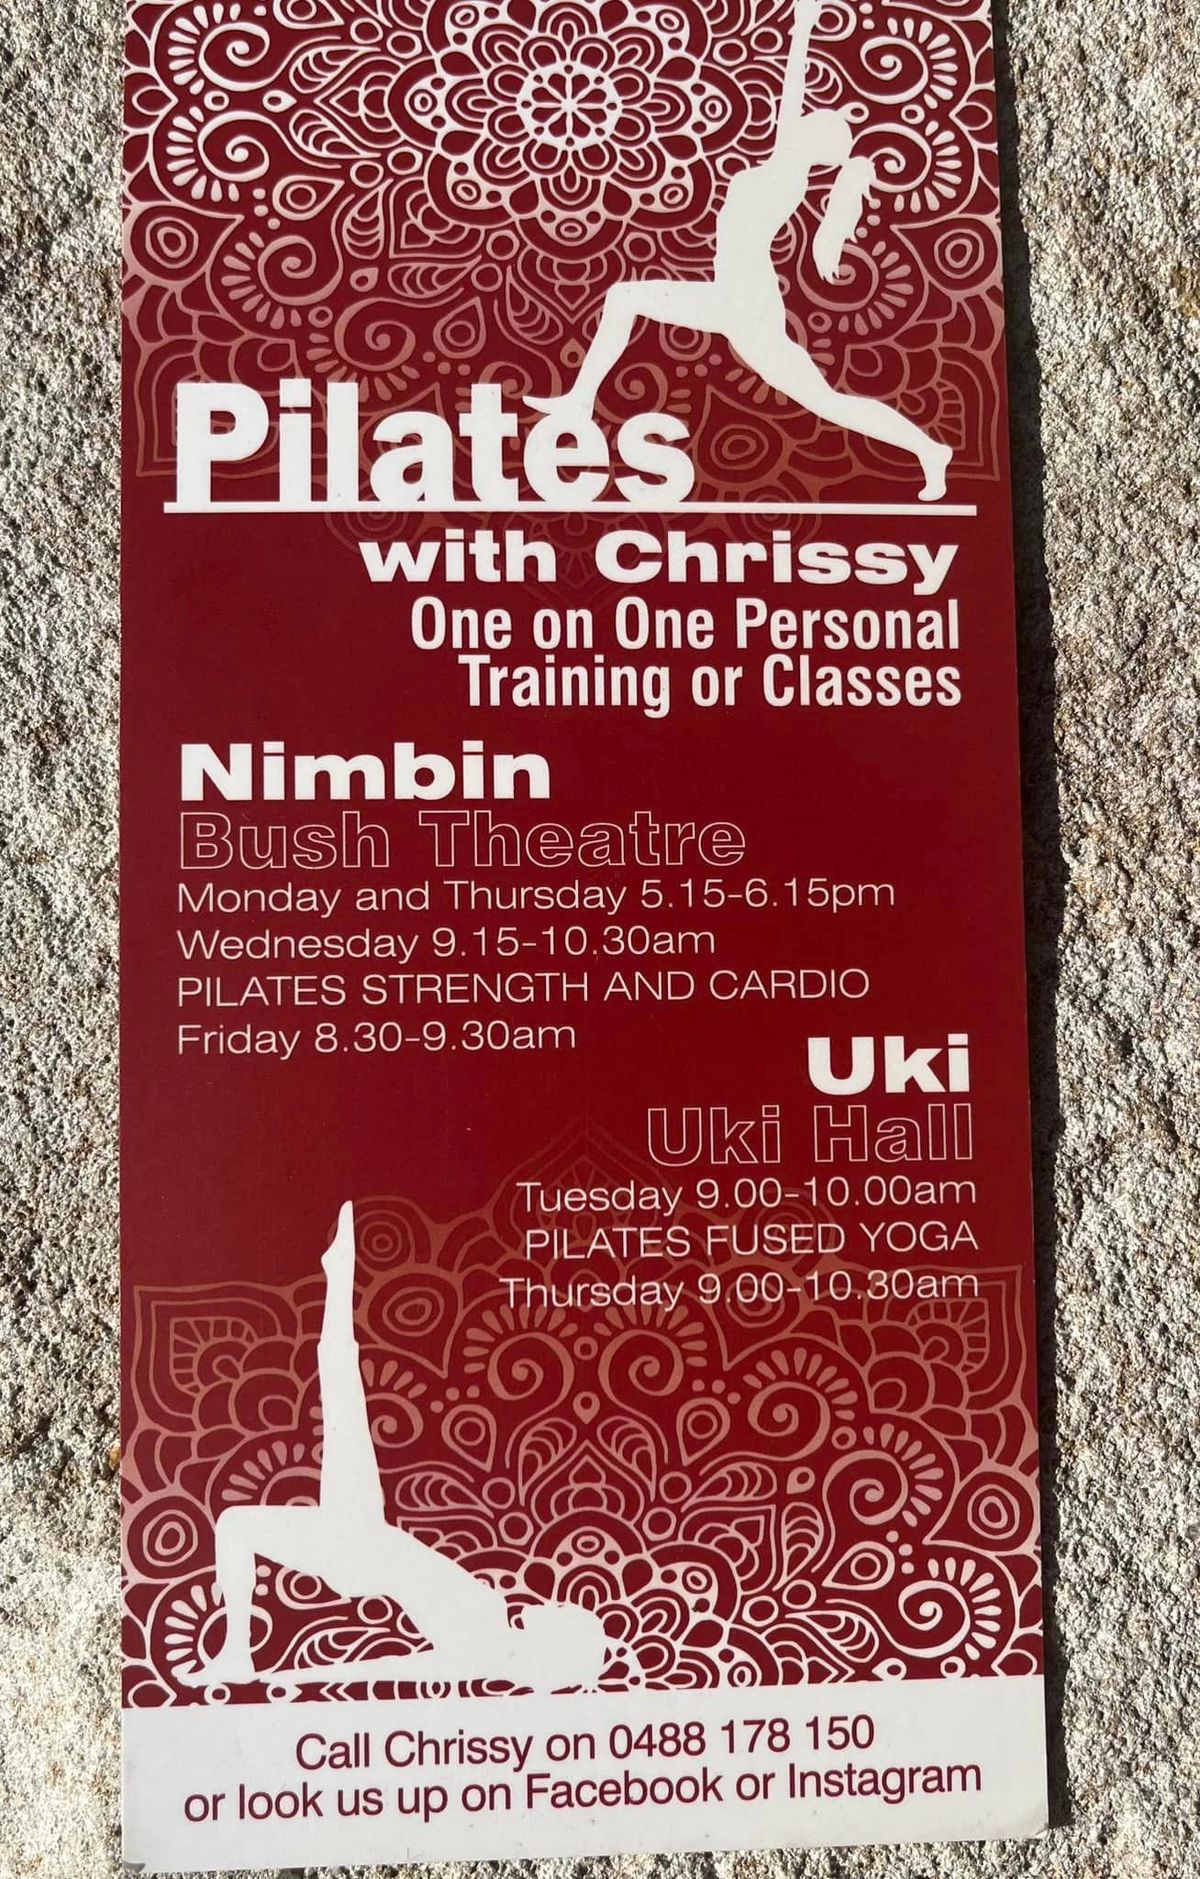 Pilates with Chrissy || One on One Training